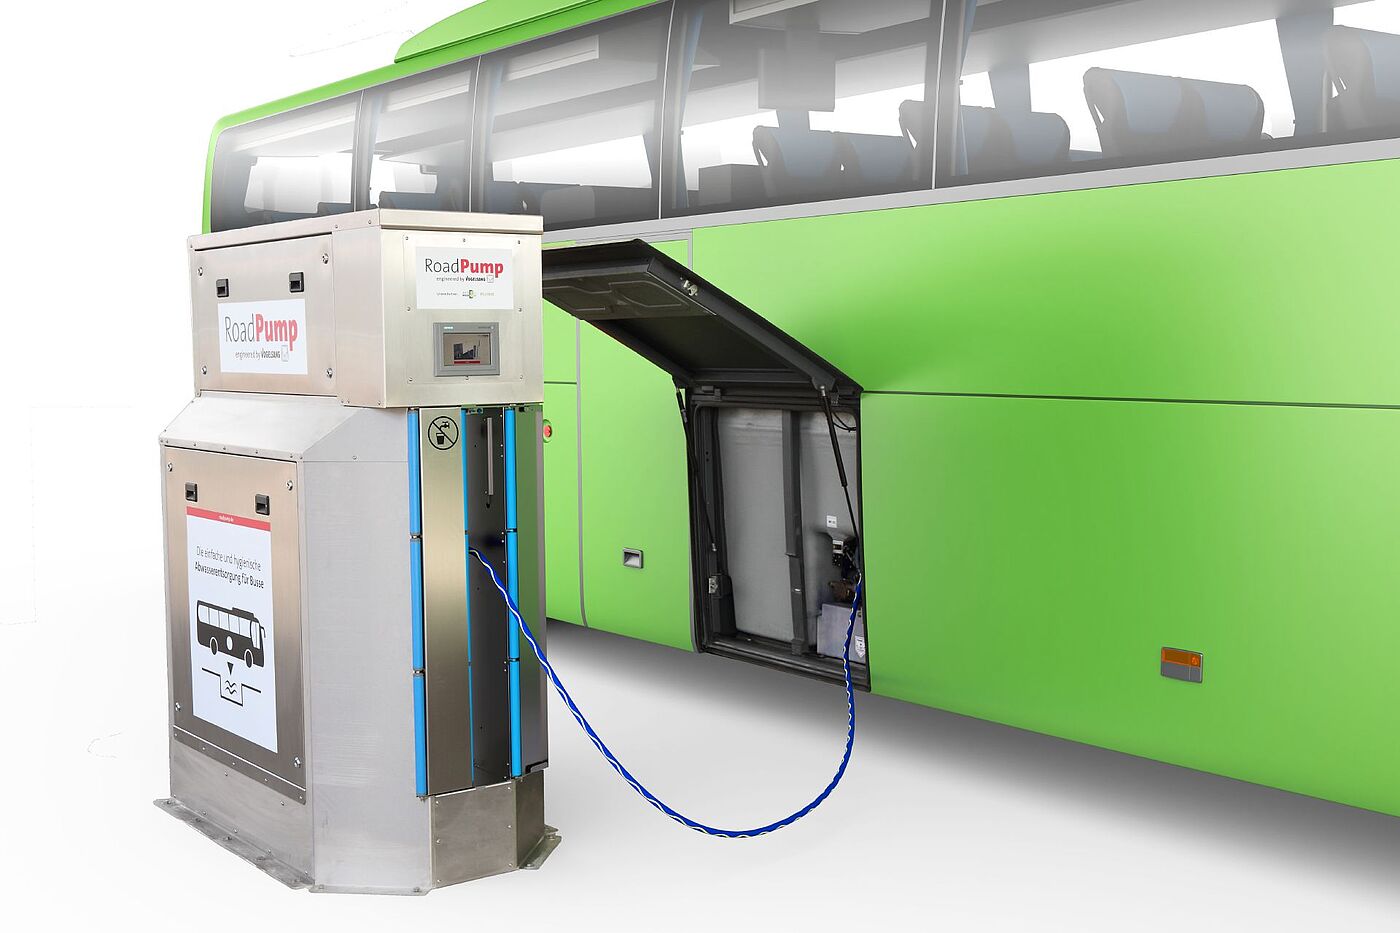 Vogelsang RoadPump: The system for fresh water supply and wastewater disposal for buses